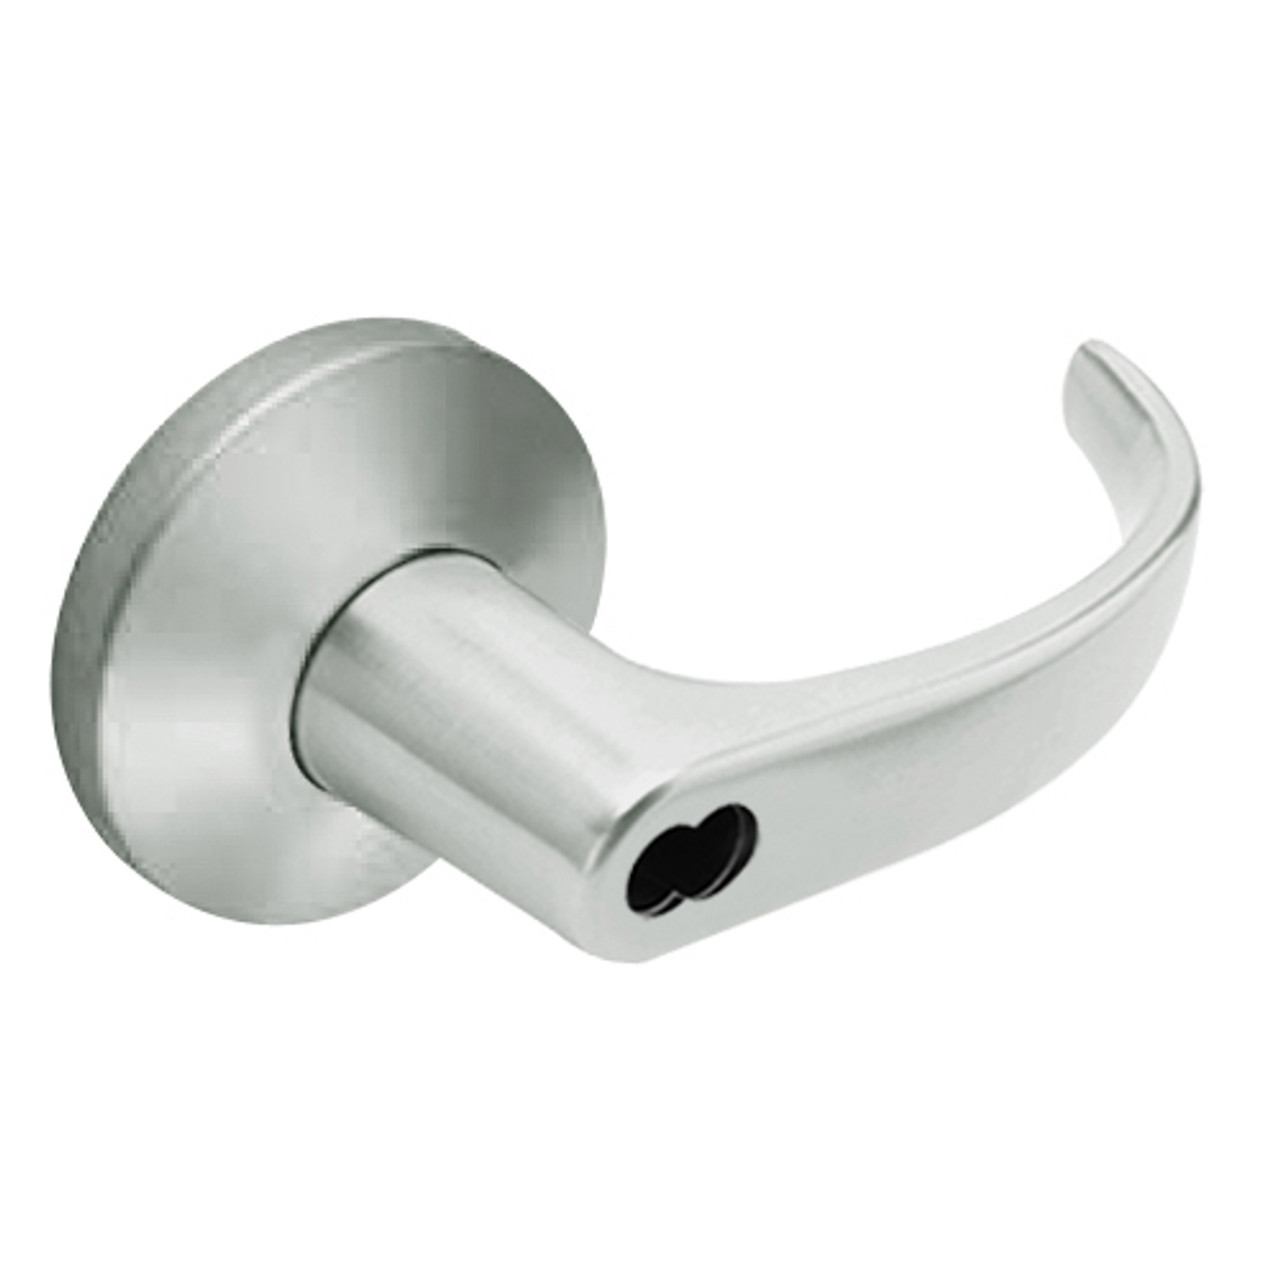 9K37EA14KSTK619LM Best 9K Series Entrance or Office Cylindrical Lever Locks with Curved with Return Lever Design Accept 7 Pin Best Core in Satin Nickel